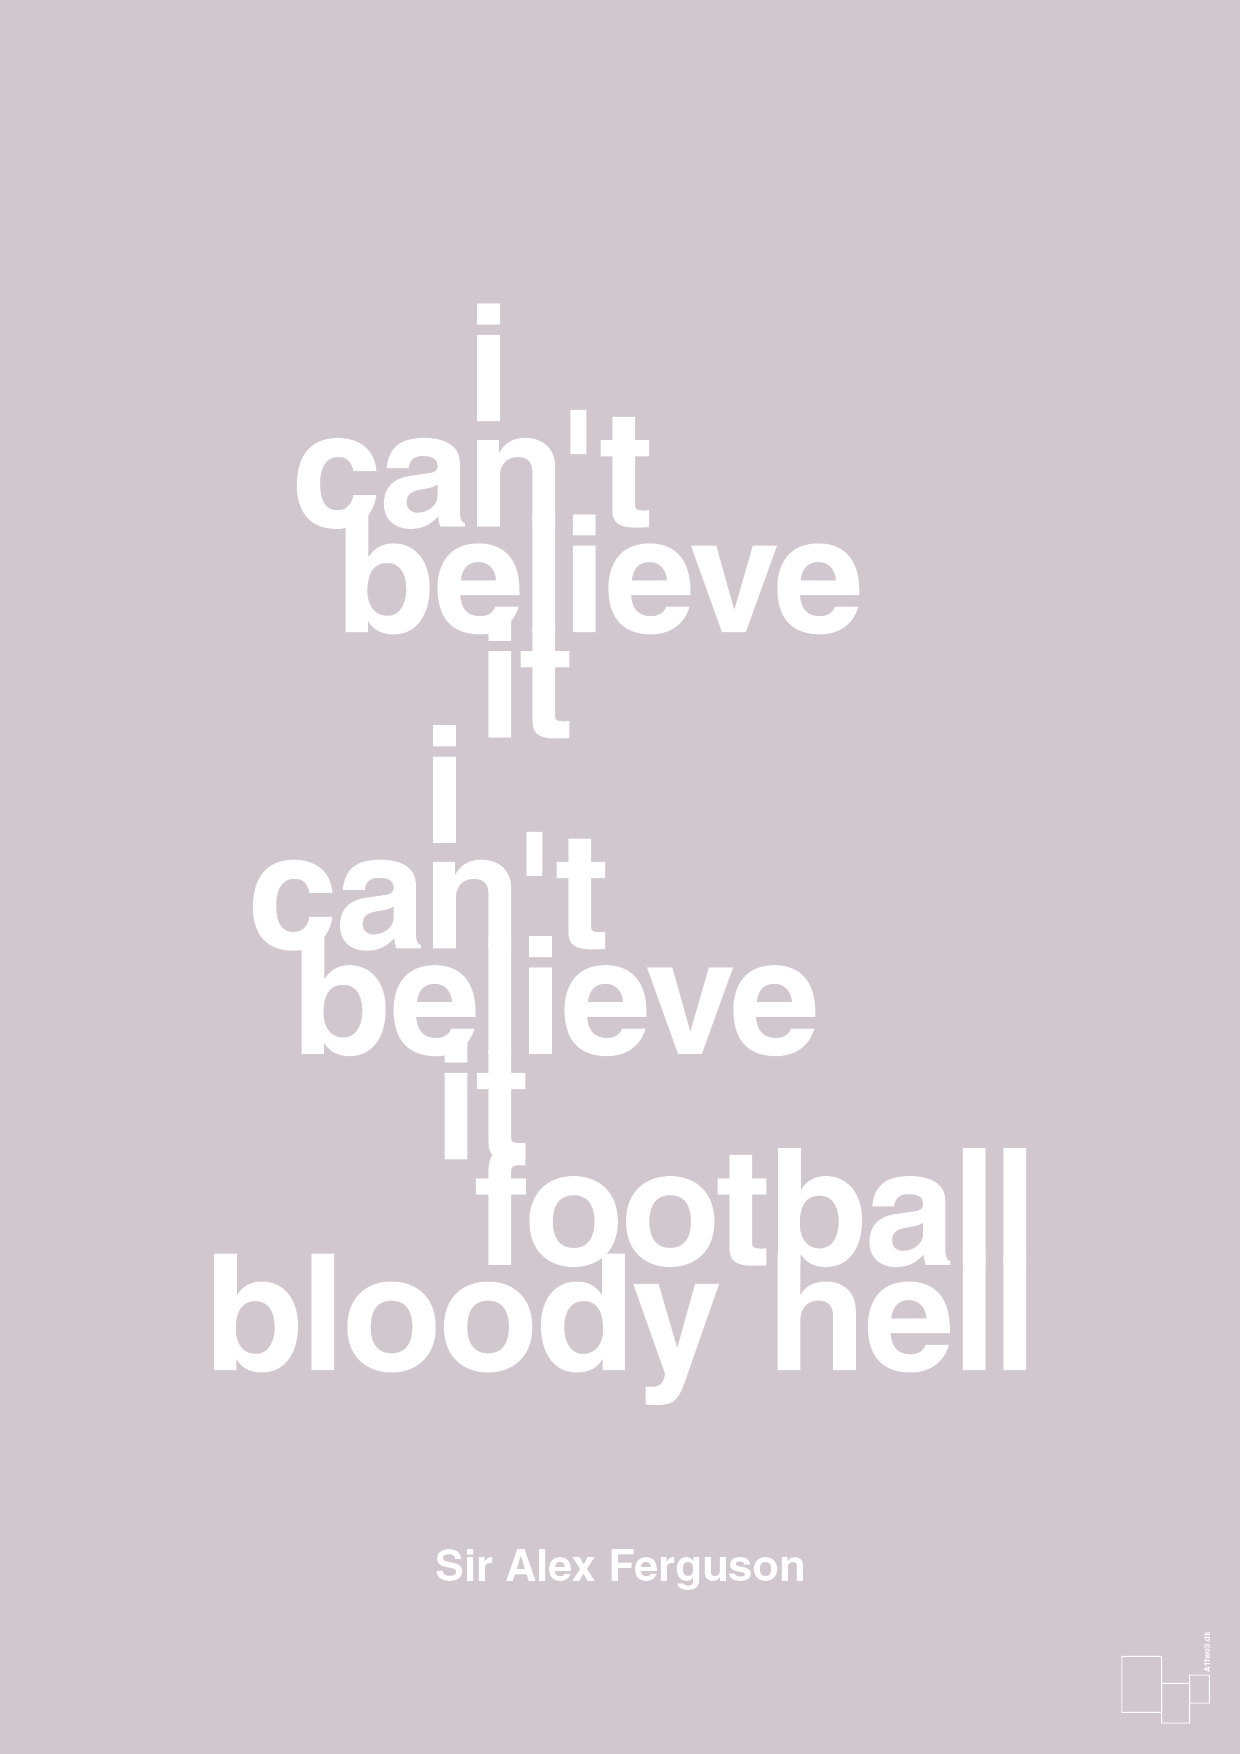 i can't believe it i can't believe it football bloody hell - Plakat med Citater i Dusty Lilac